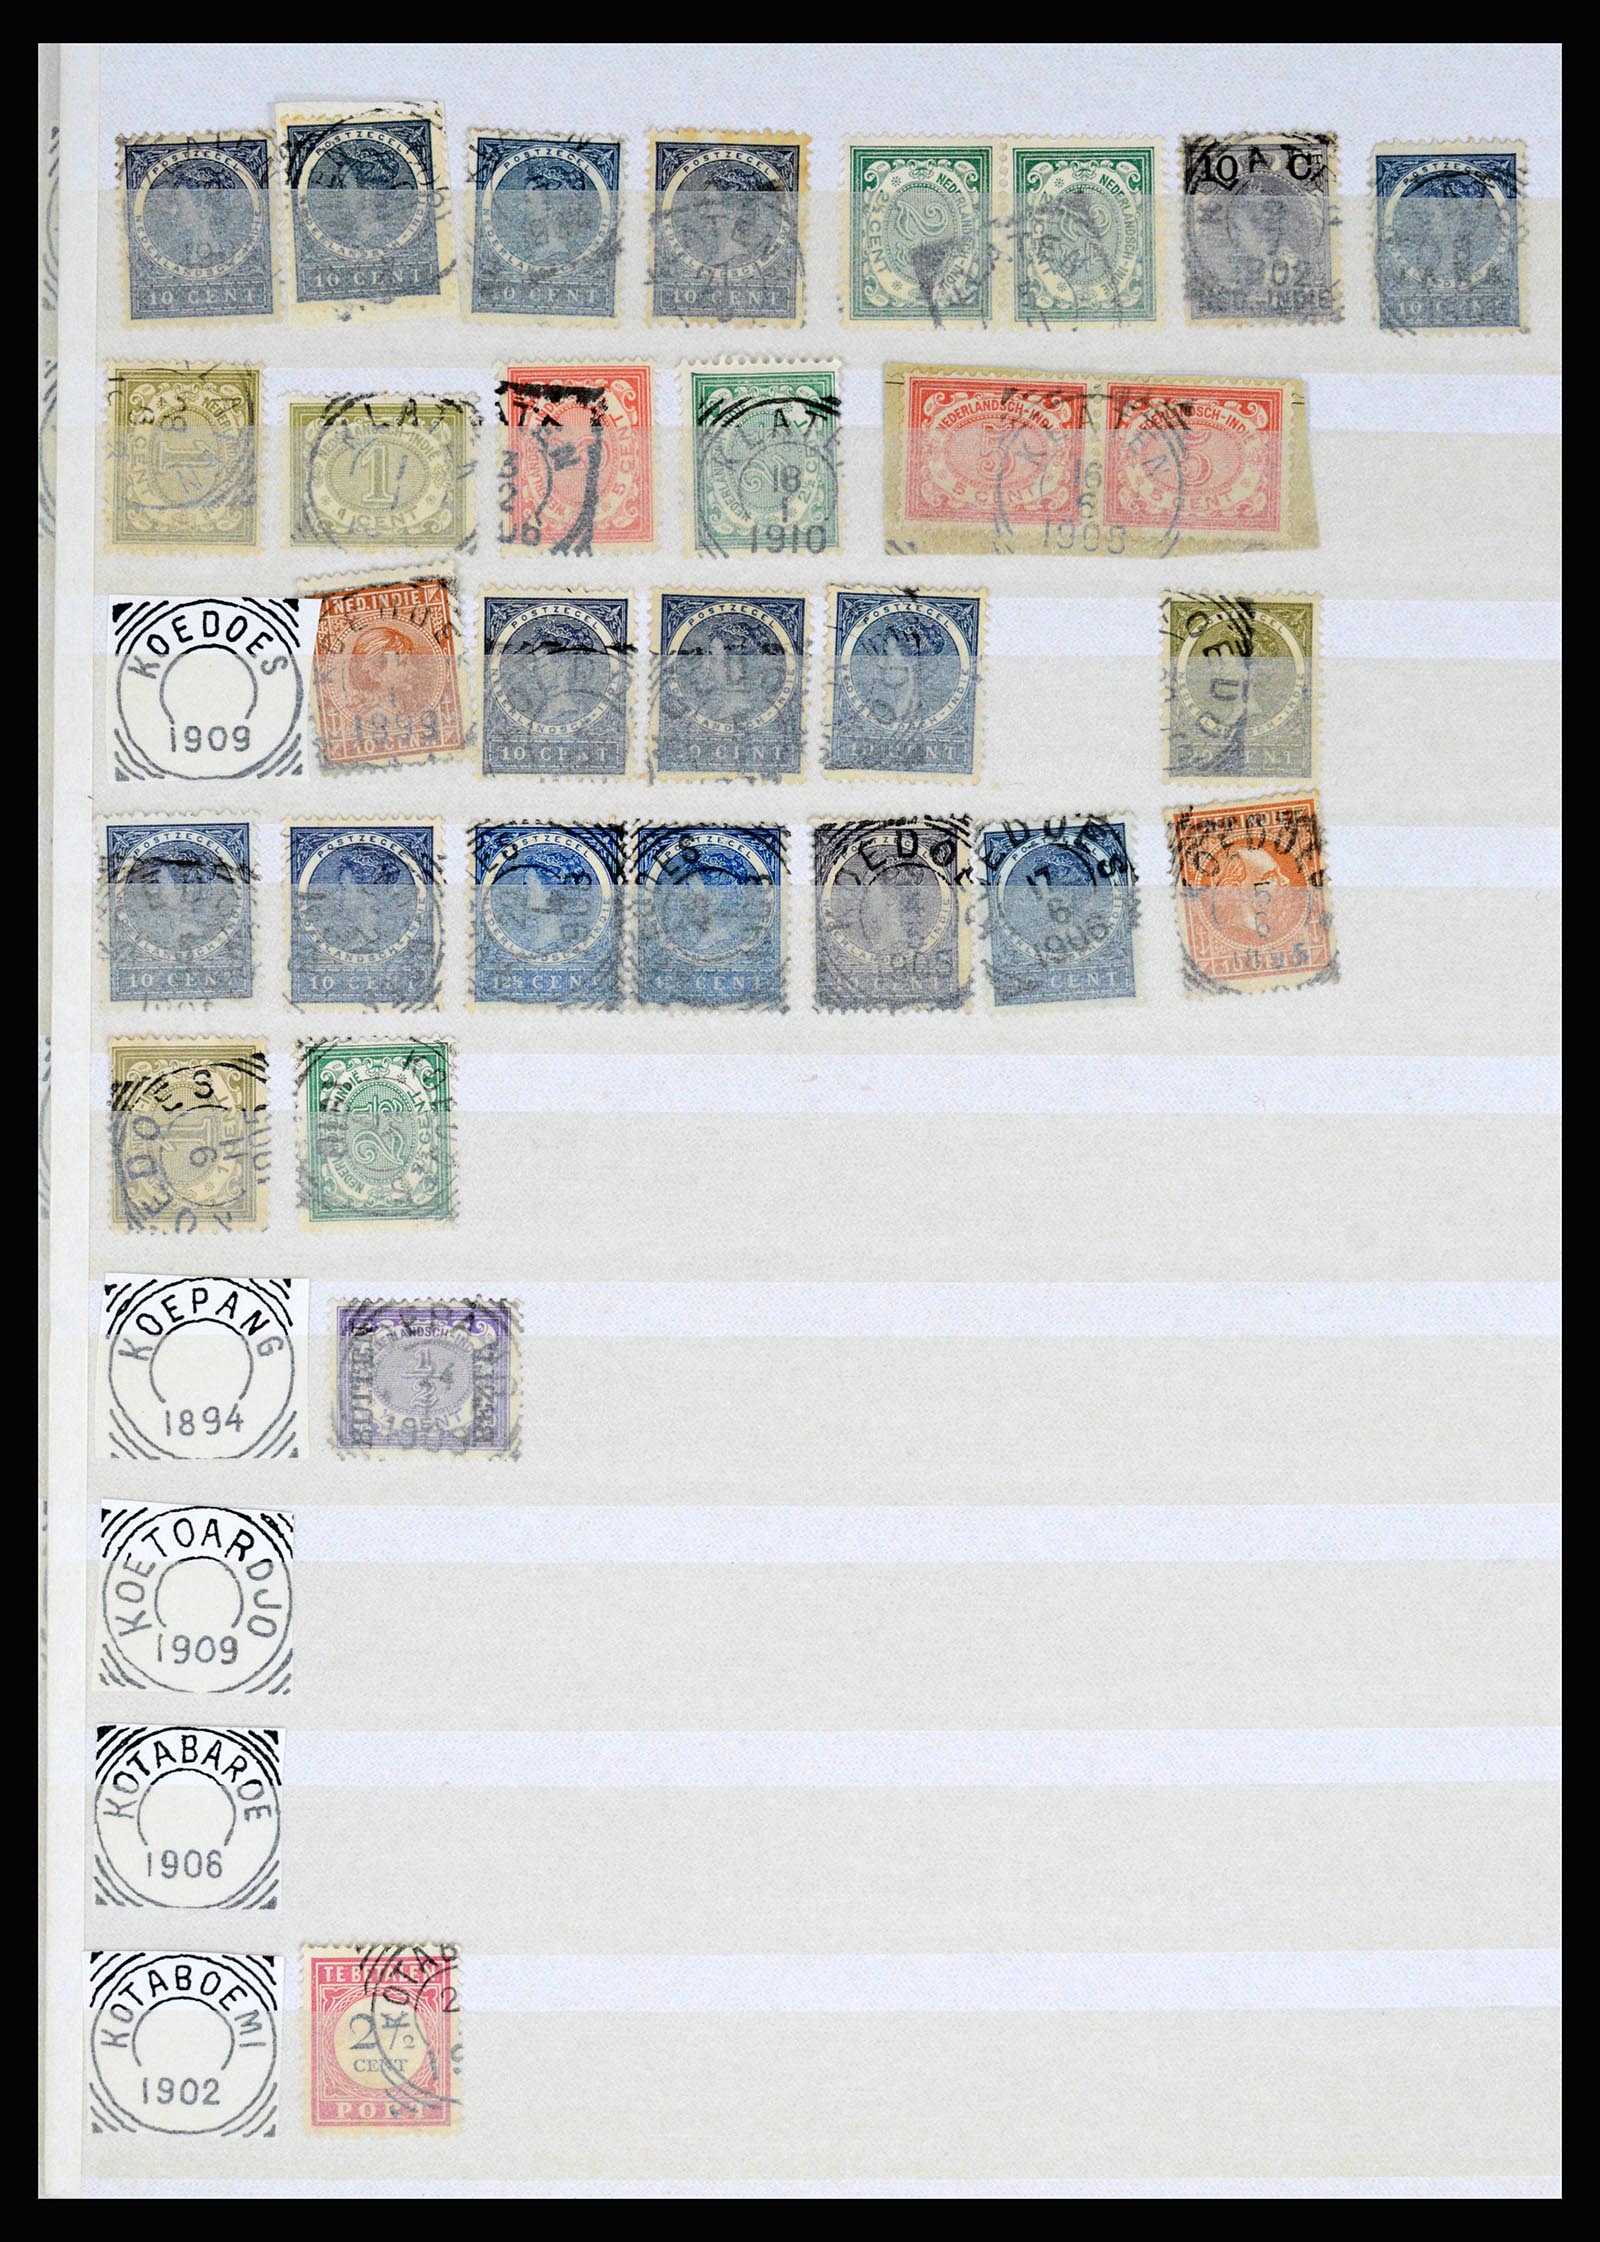 36839 073 - Stamp collection 36839 Dutch east Indies square cancels.